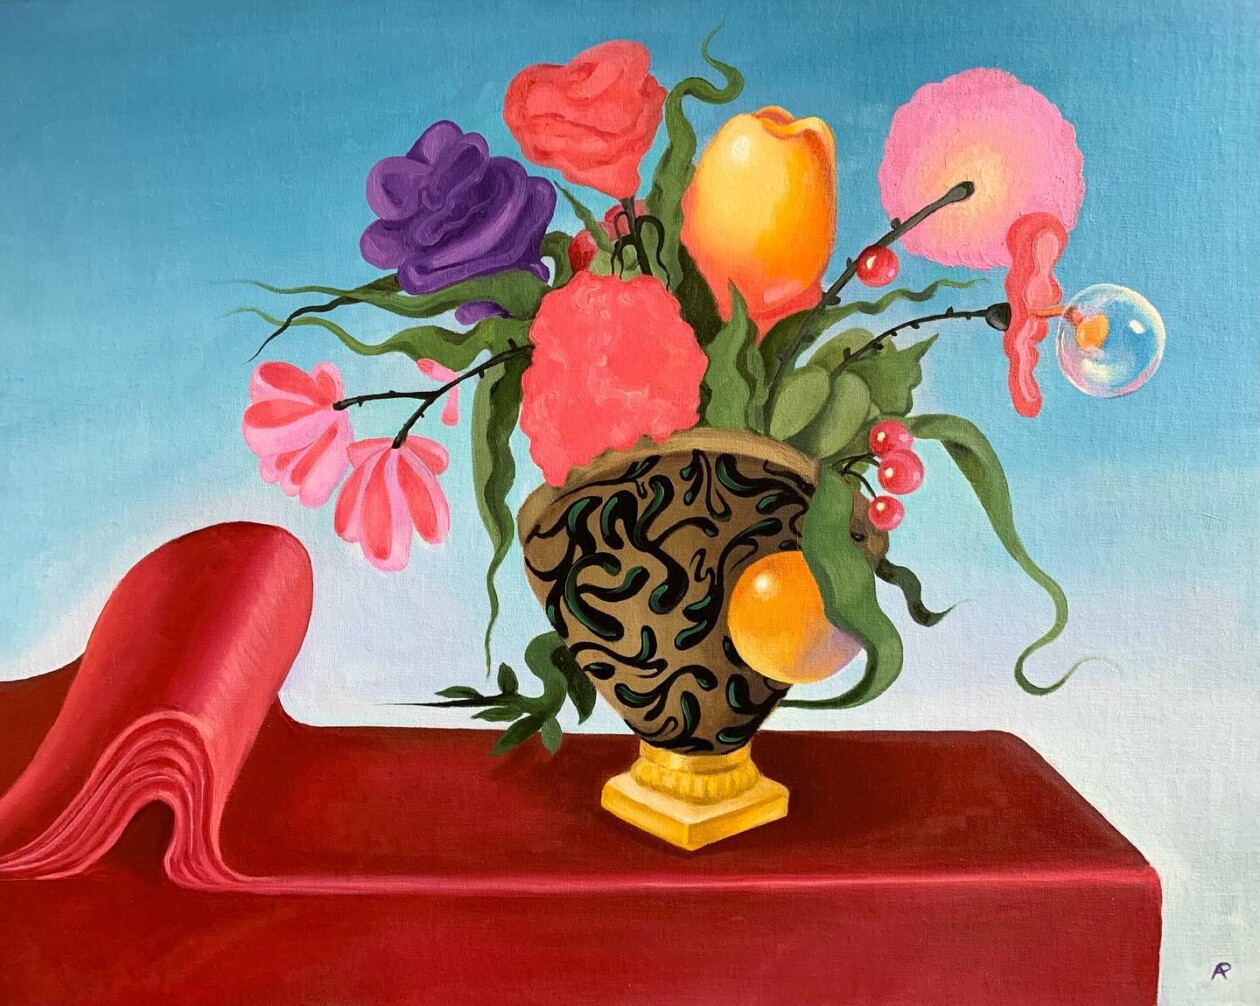 Lush Surreal Still Life Paintings By American Artist Arabella Proffer (9)